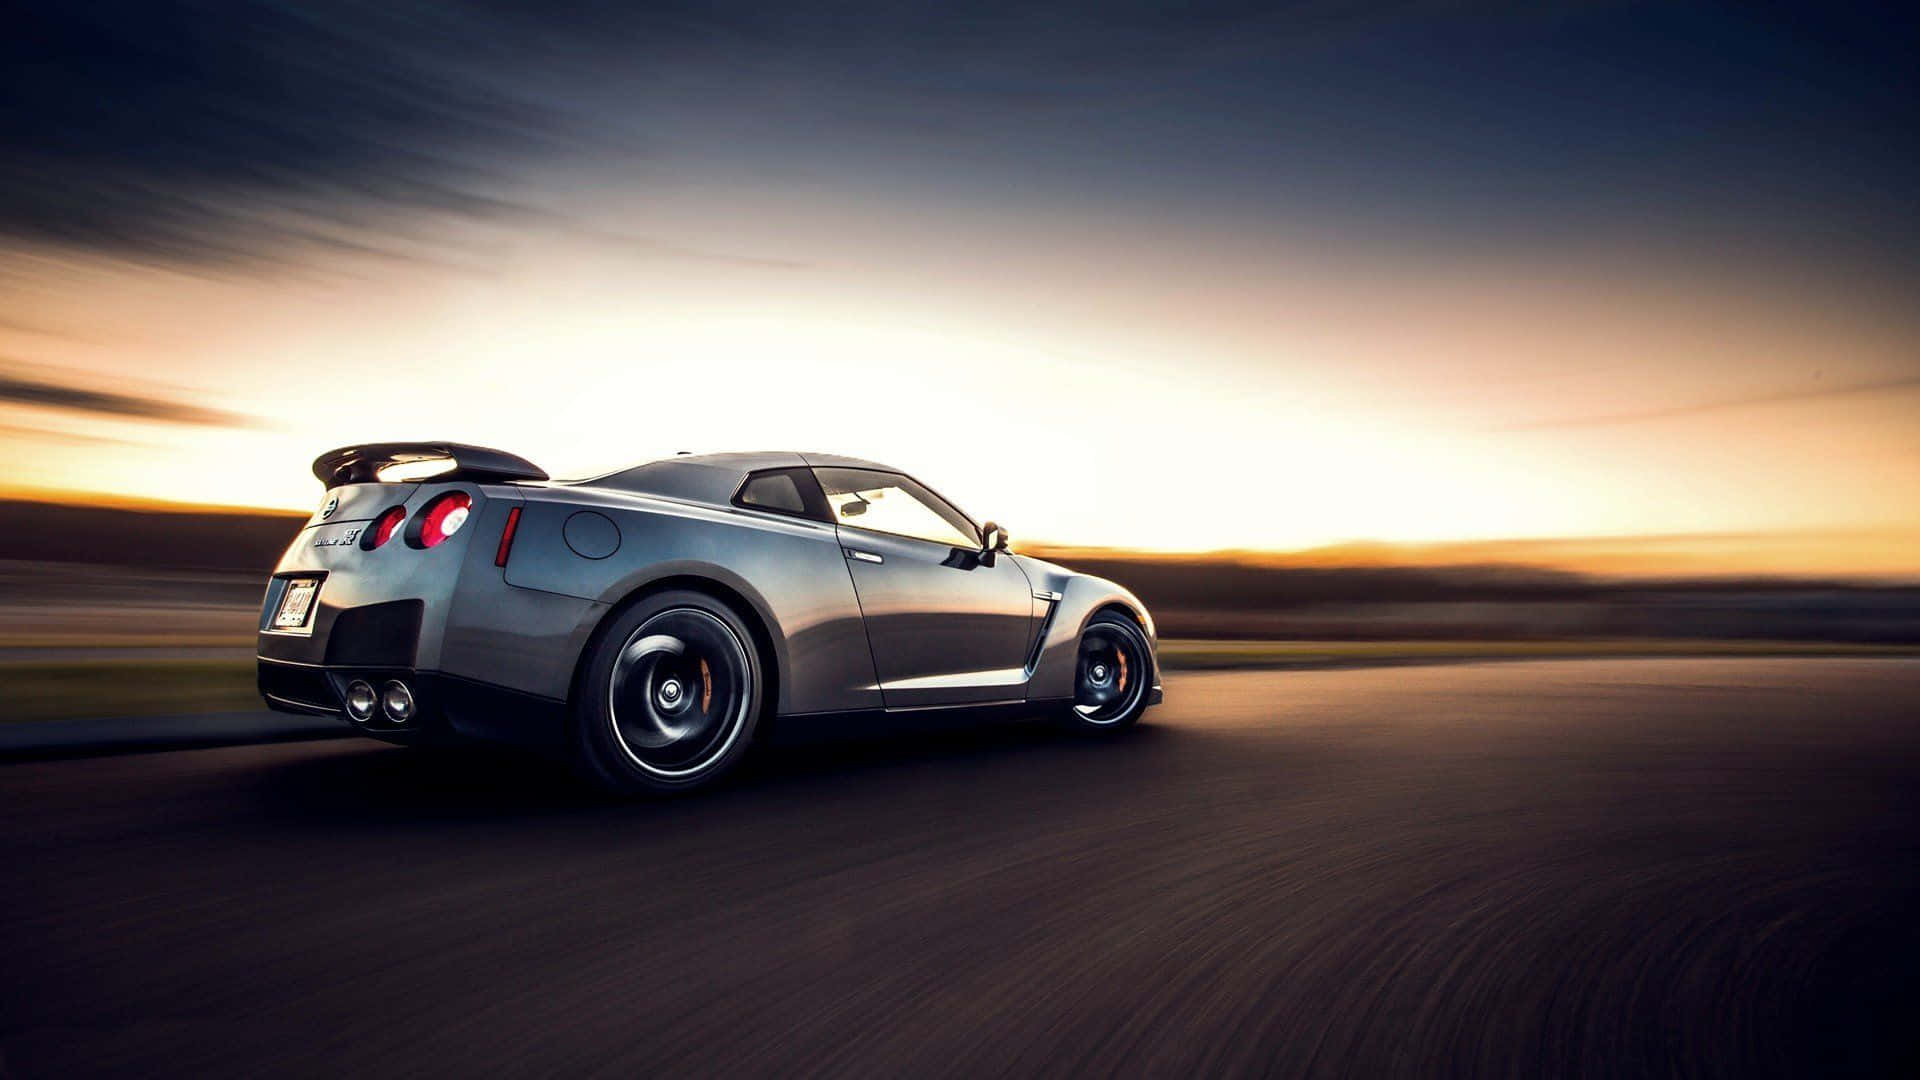 Cool Gtr - Blend Of Style And Performance